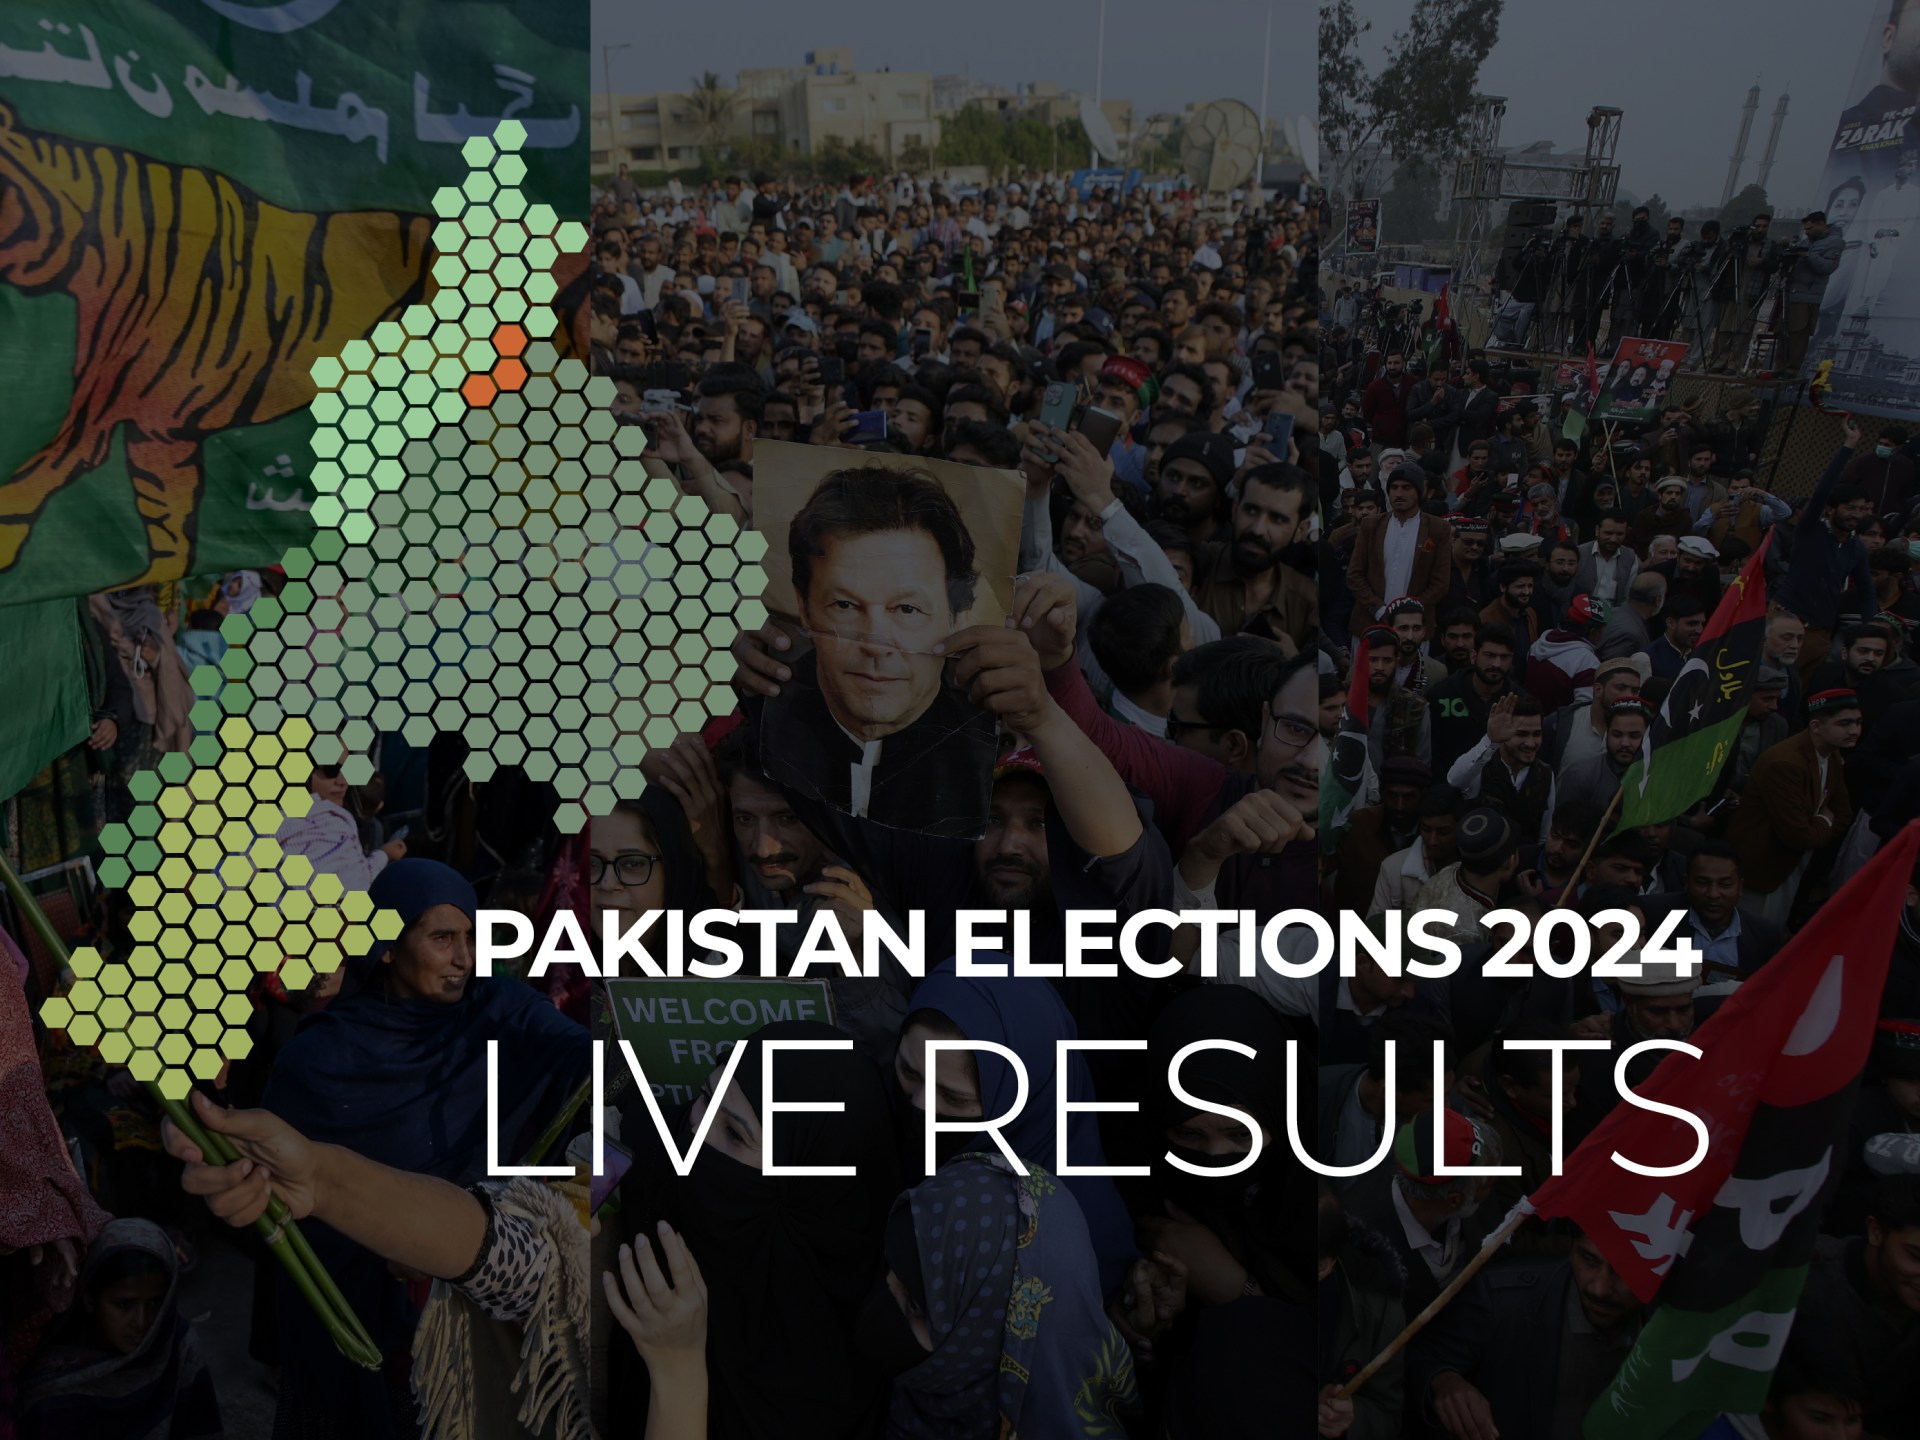 Live-results-cover-pakistan-2024-04-1707299551.jpg